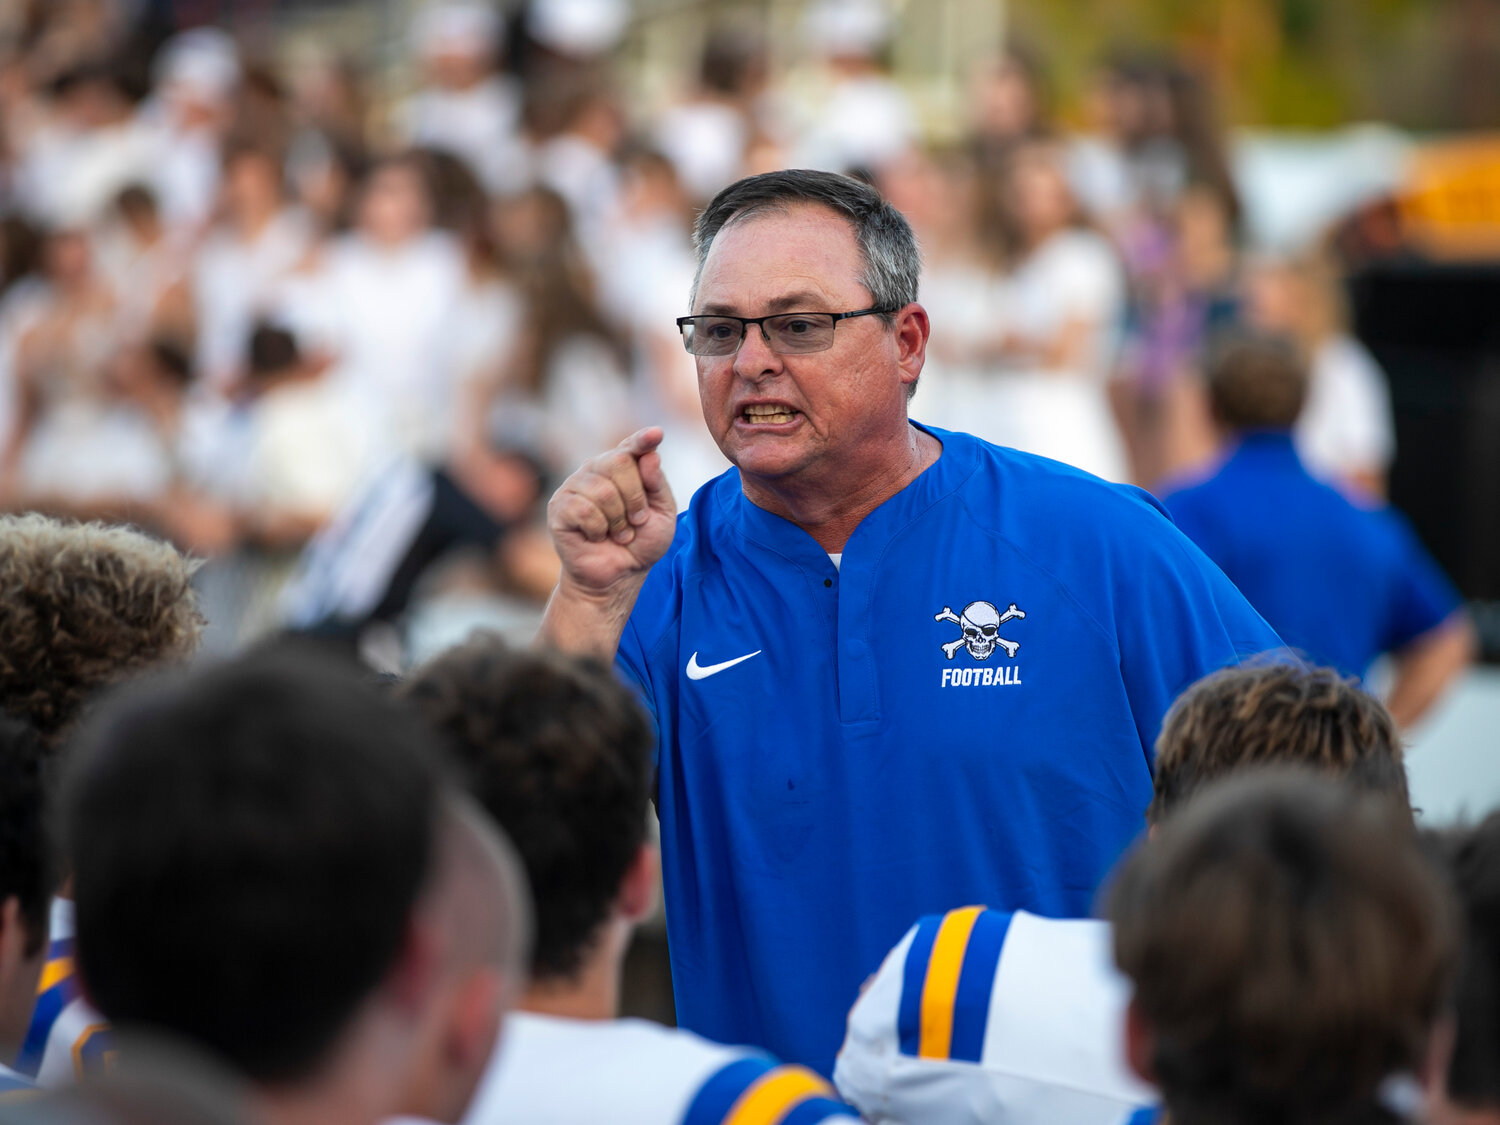 Fairhope head football coach Tim Carter meets with his team before the season-opening contest against the Spanish Fort Toros on the road on Thursday, Aug. 24. The Pirates will be away again this week to face the Choctawhatchee Indians in a rematch of a 43-39 shootout from last year.